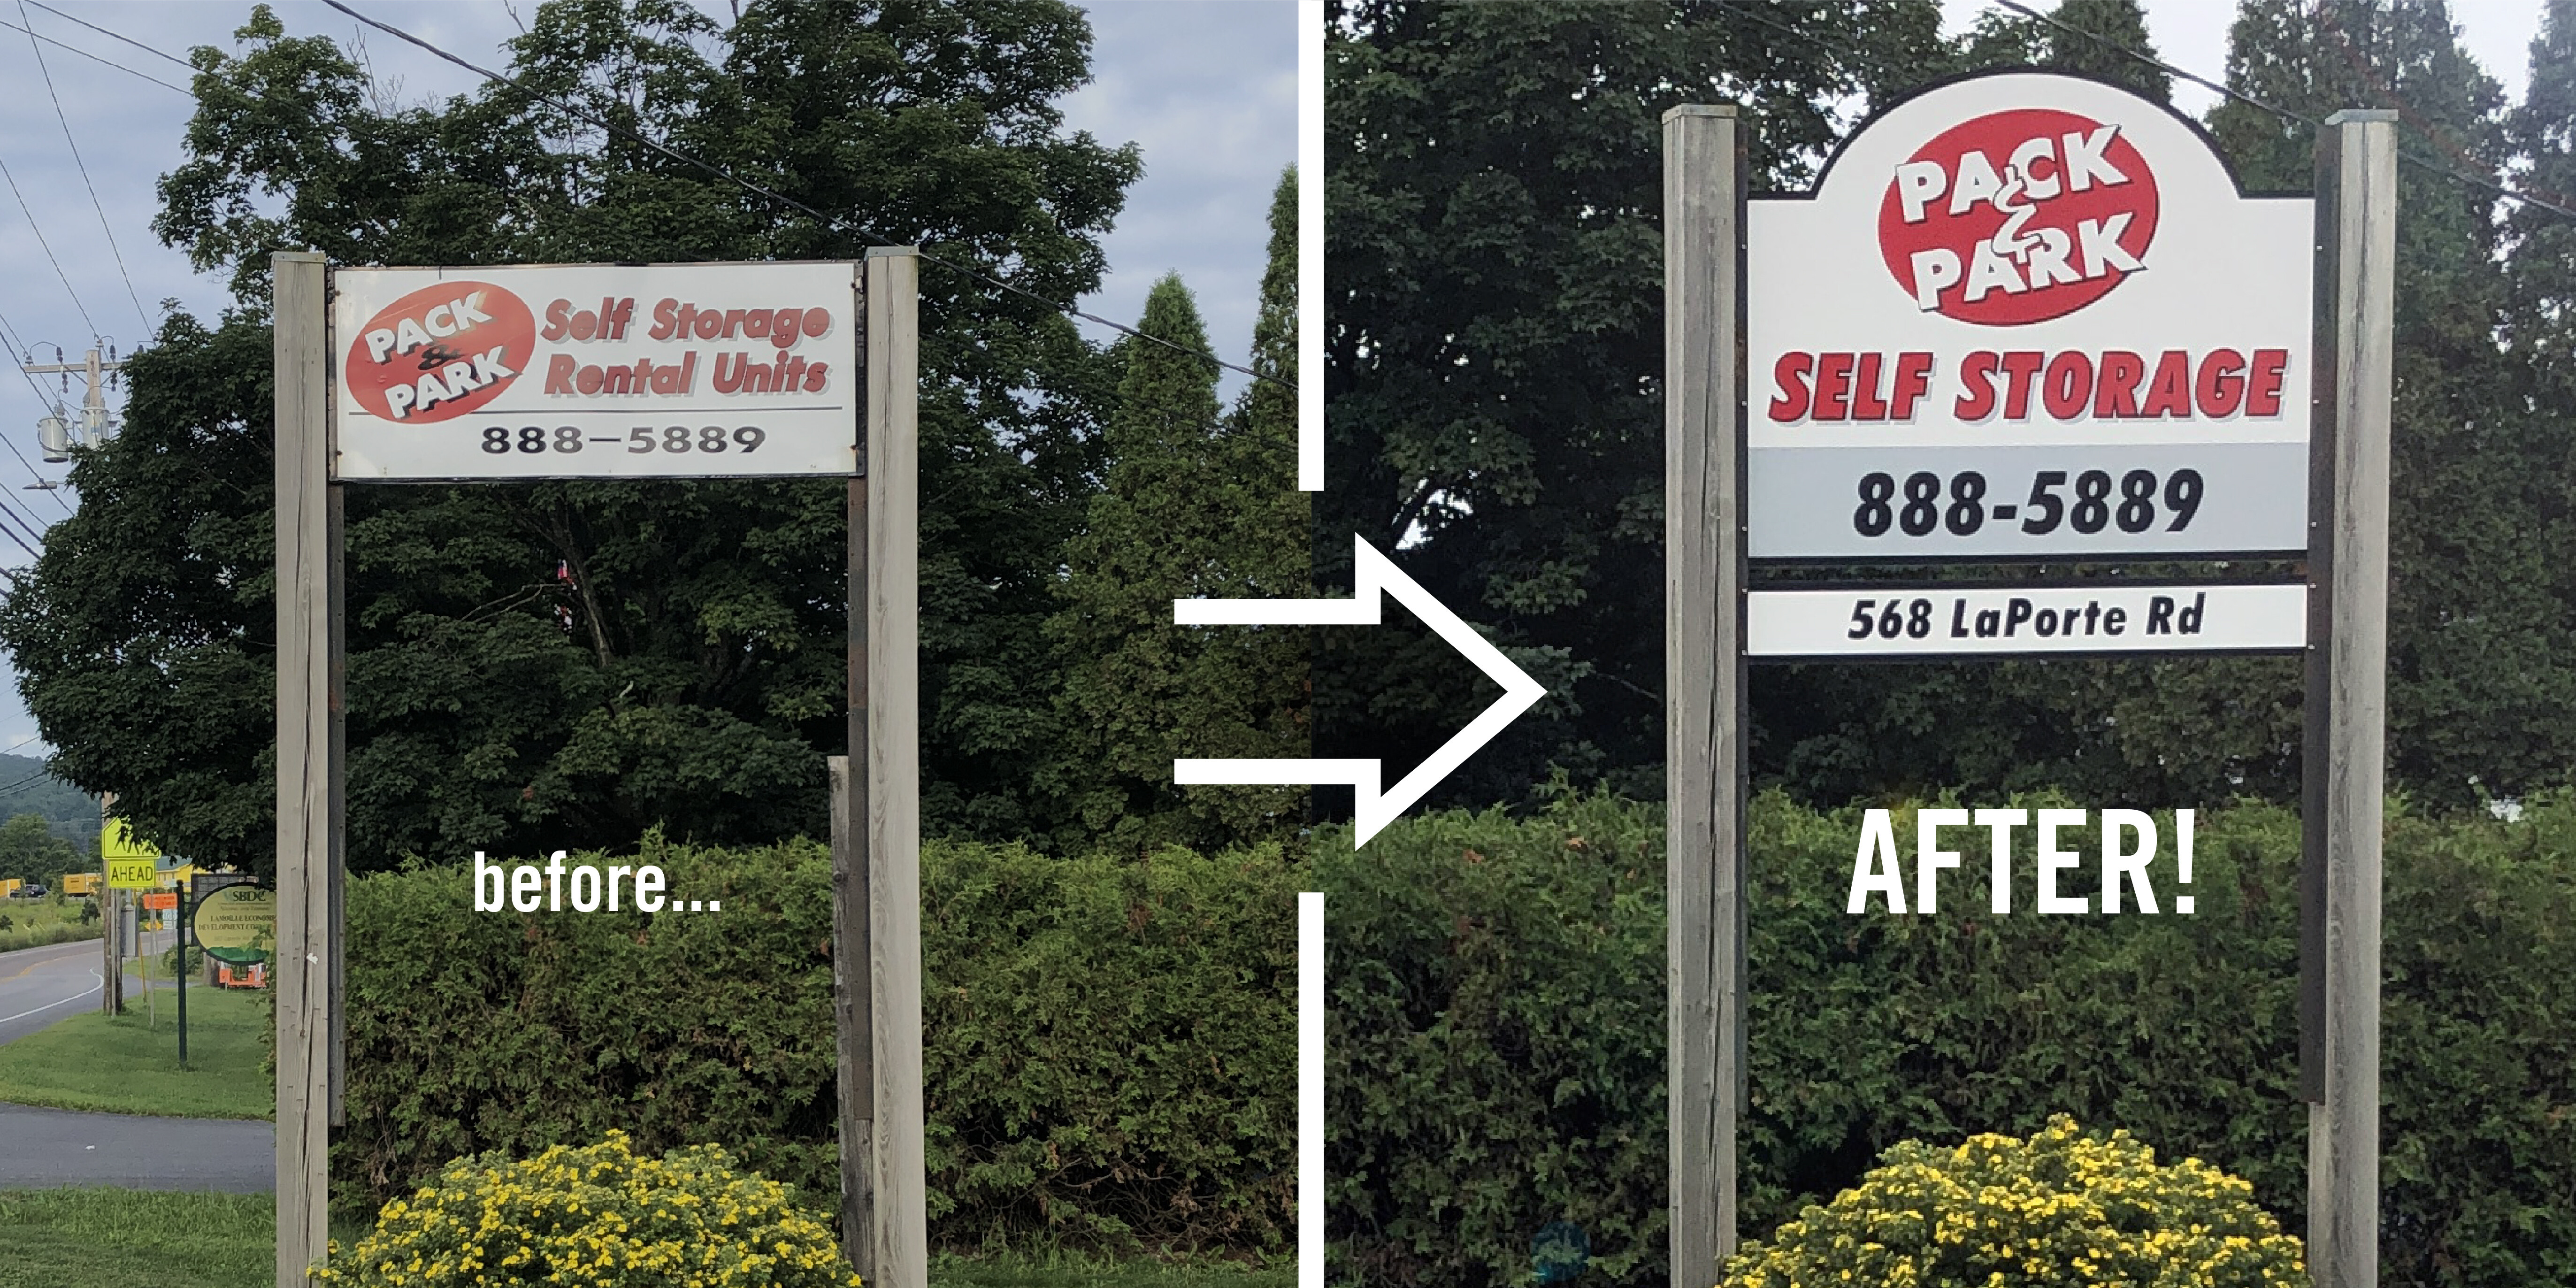 Before and after business signage for pack and park self storage rental units